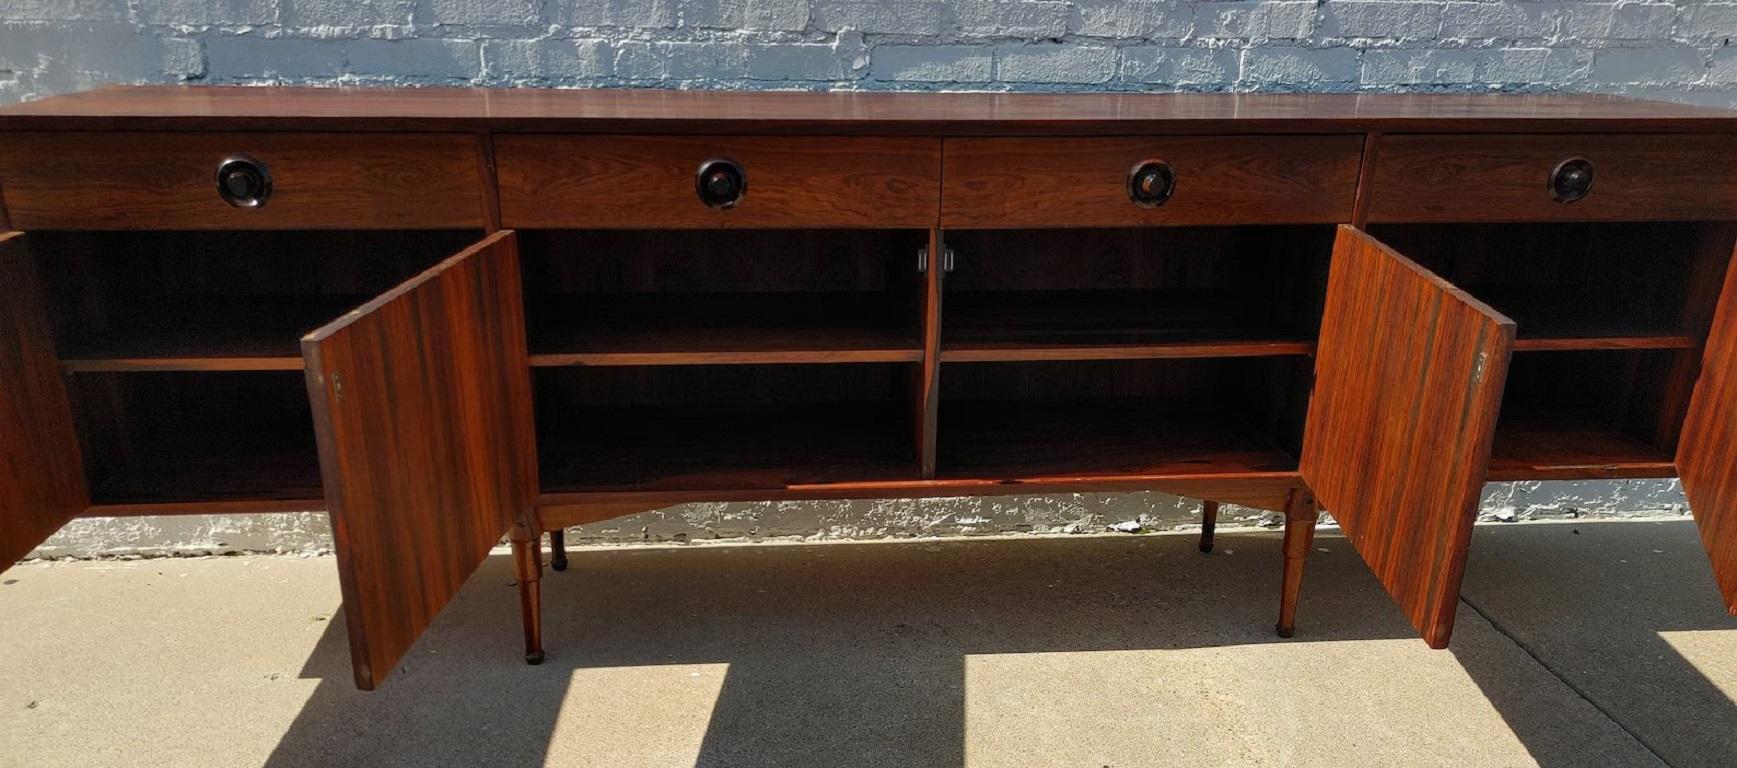 Mid Century Italian Modern Rosewood Sideboard In Good Condition For Sale In Tulsa, OK